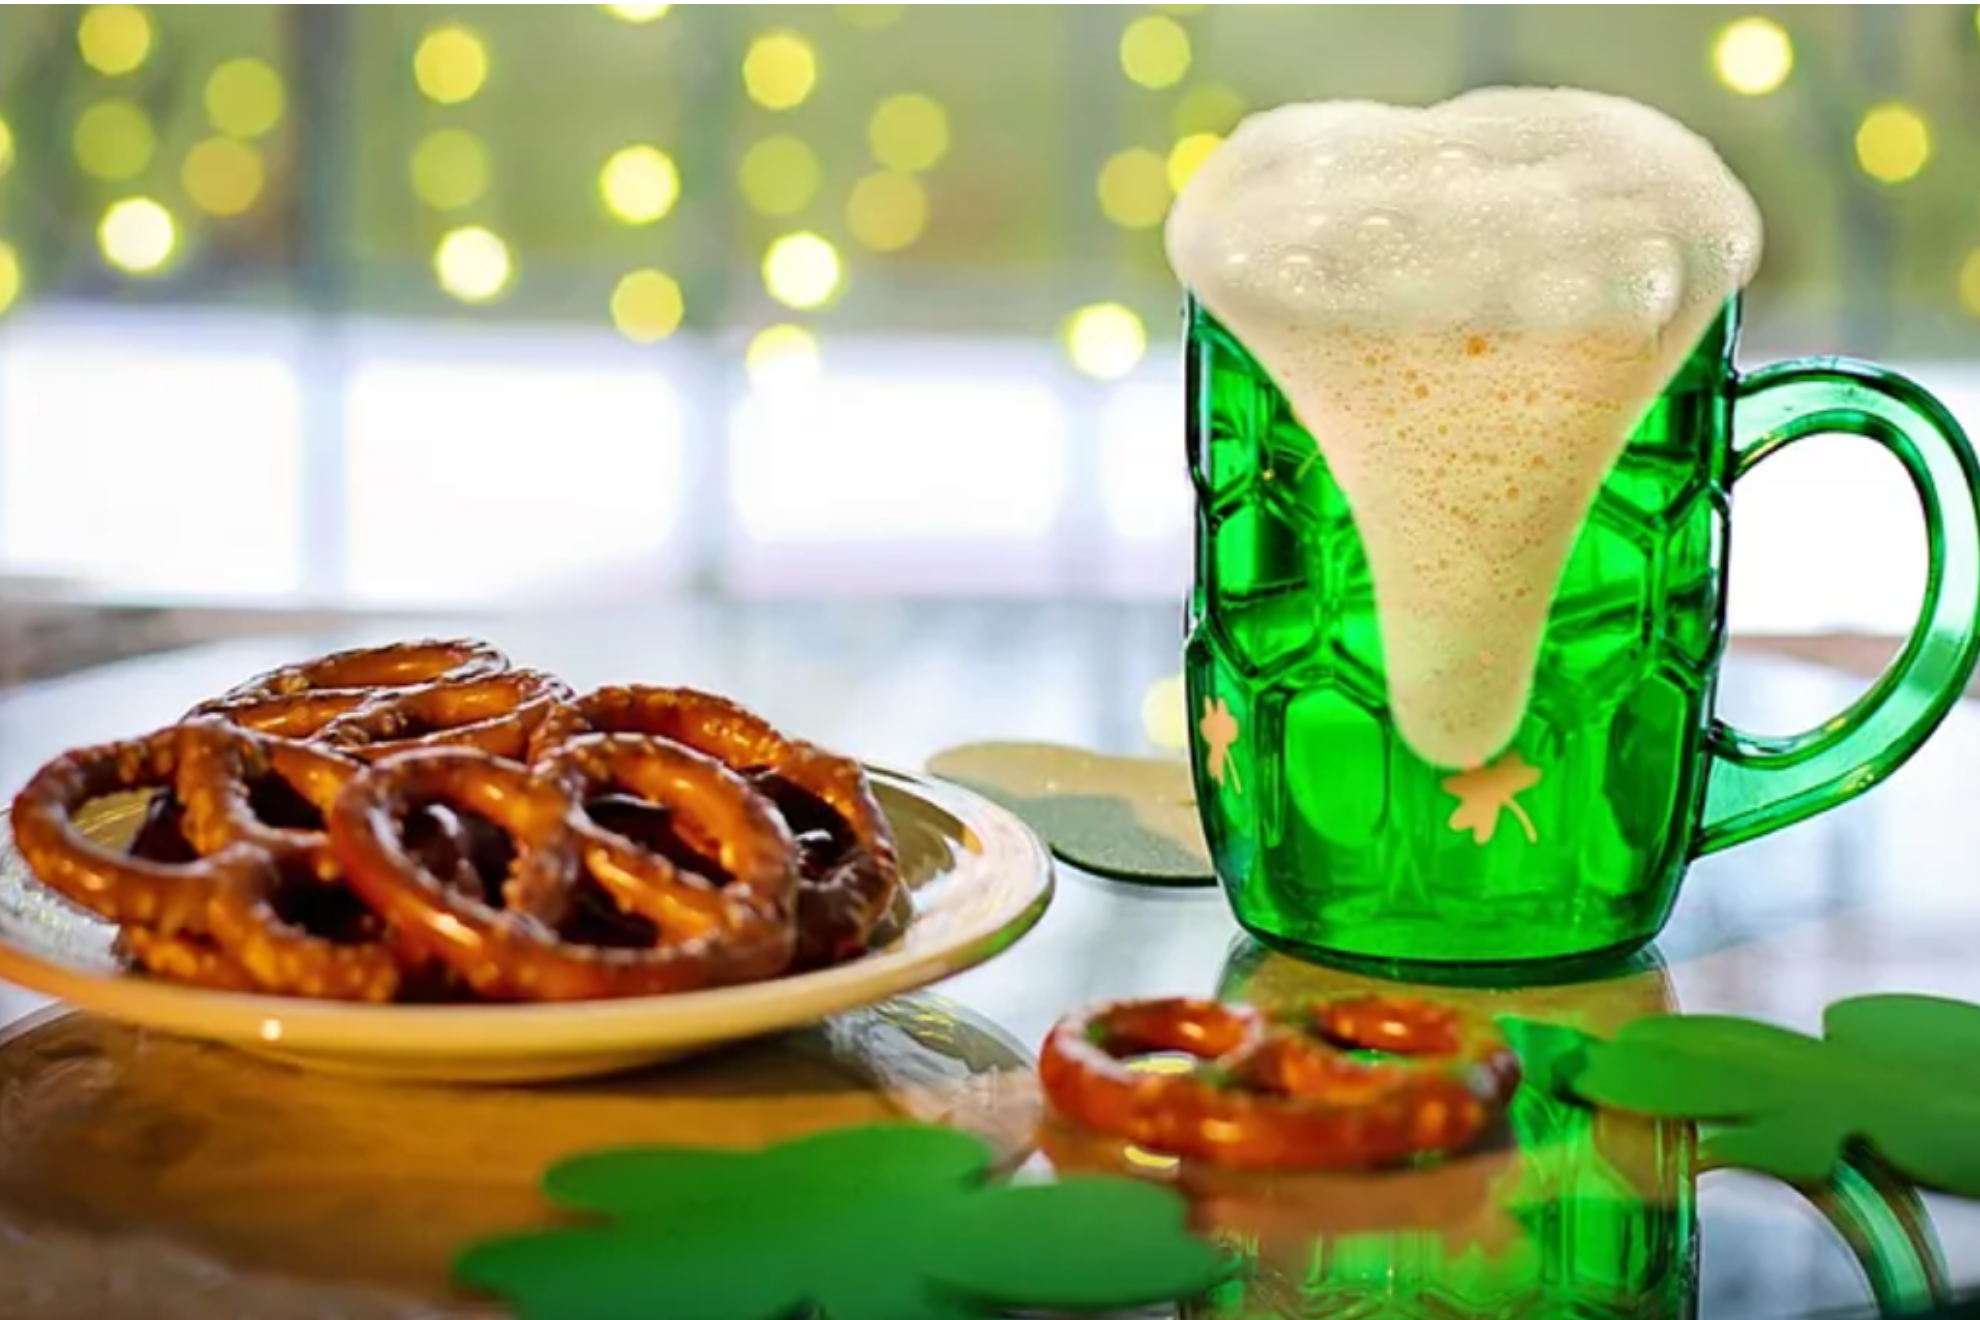 Why do people drink beer on St. Patricks Day and what is the origin of the tradition?